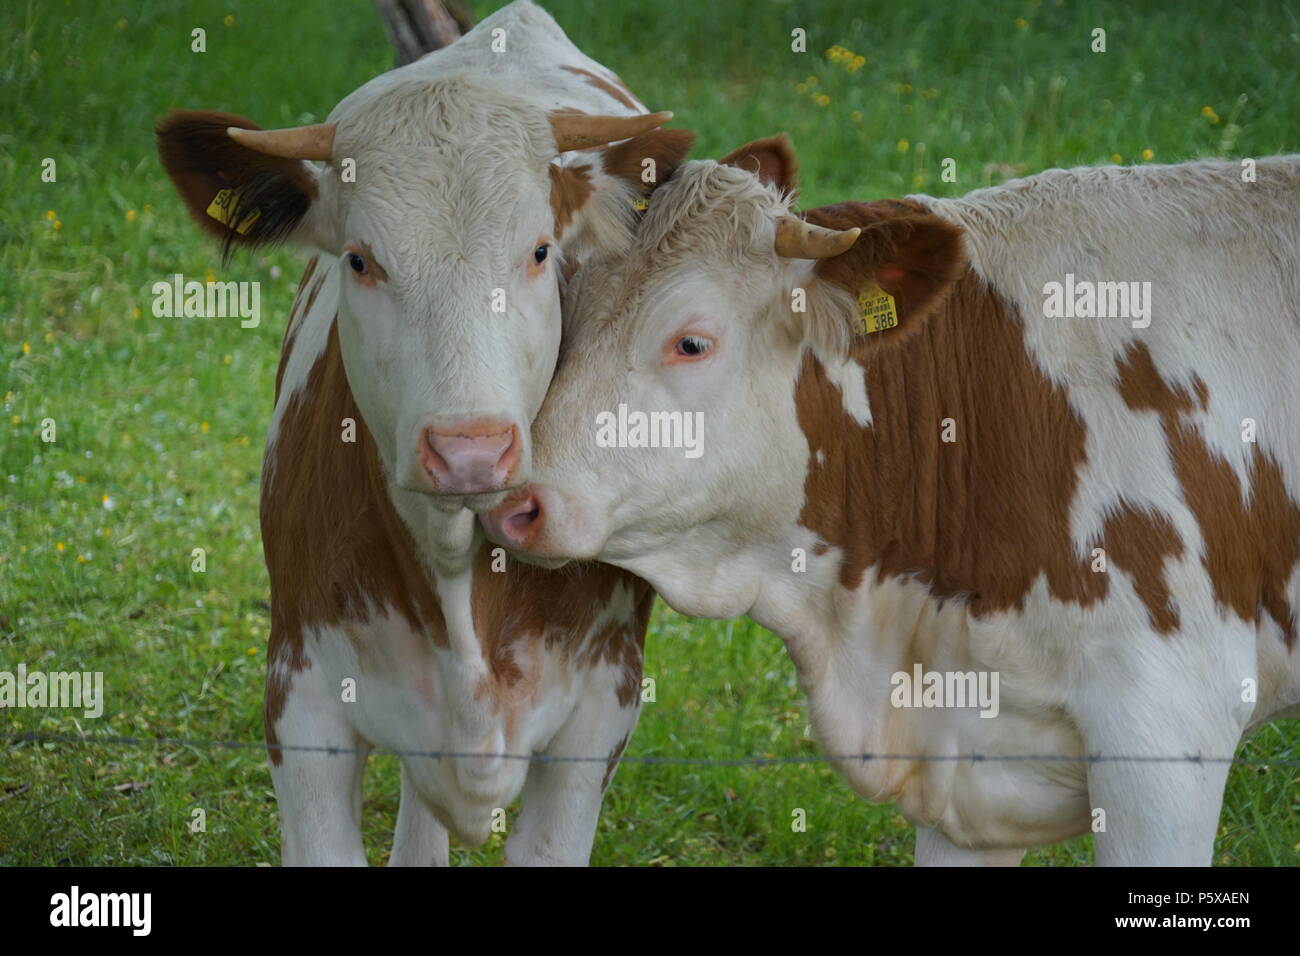 Two young Bulls on the Pasture, Southerm Germany, Europe Stock Photo